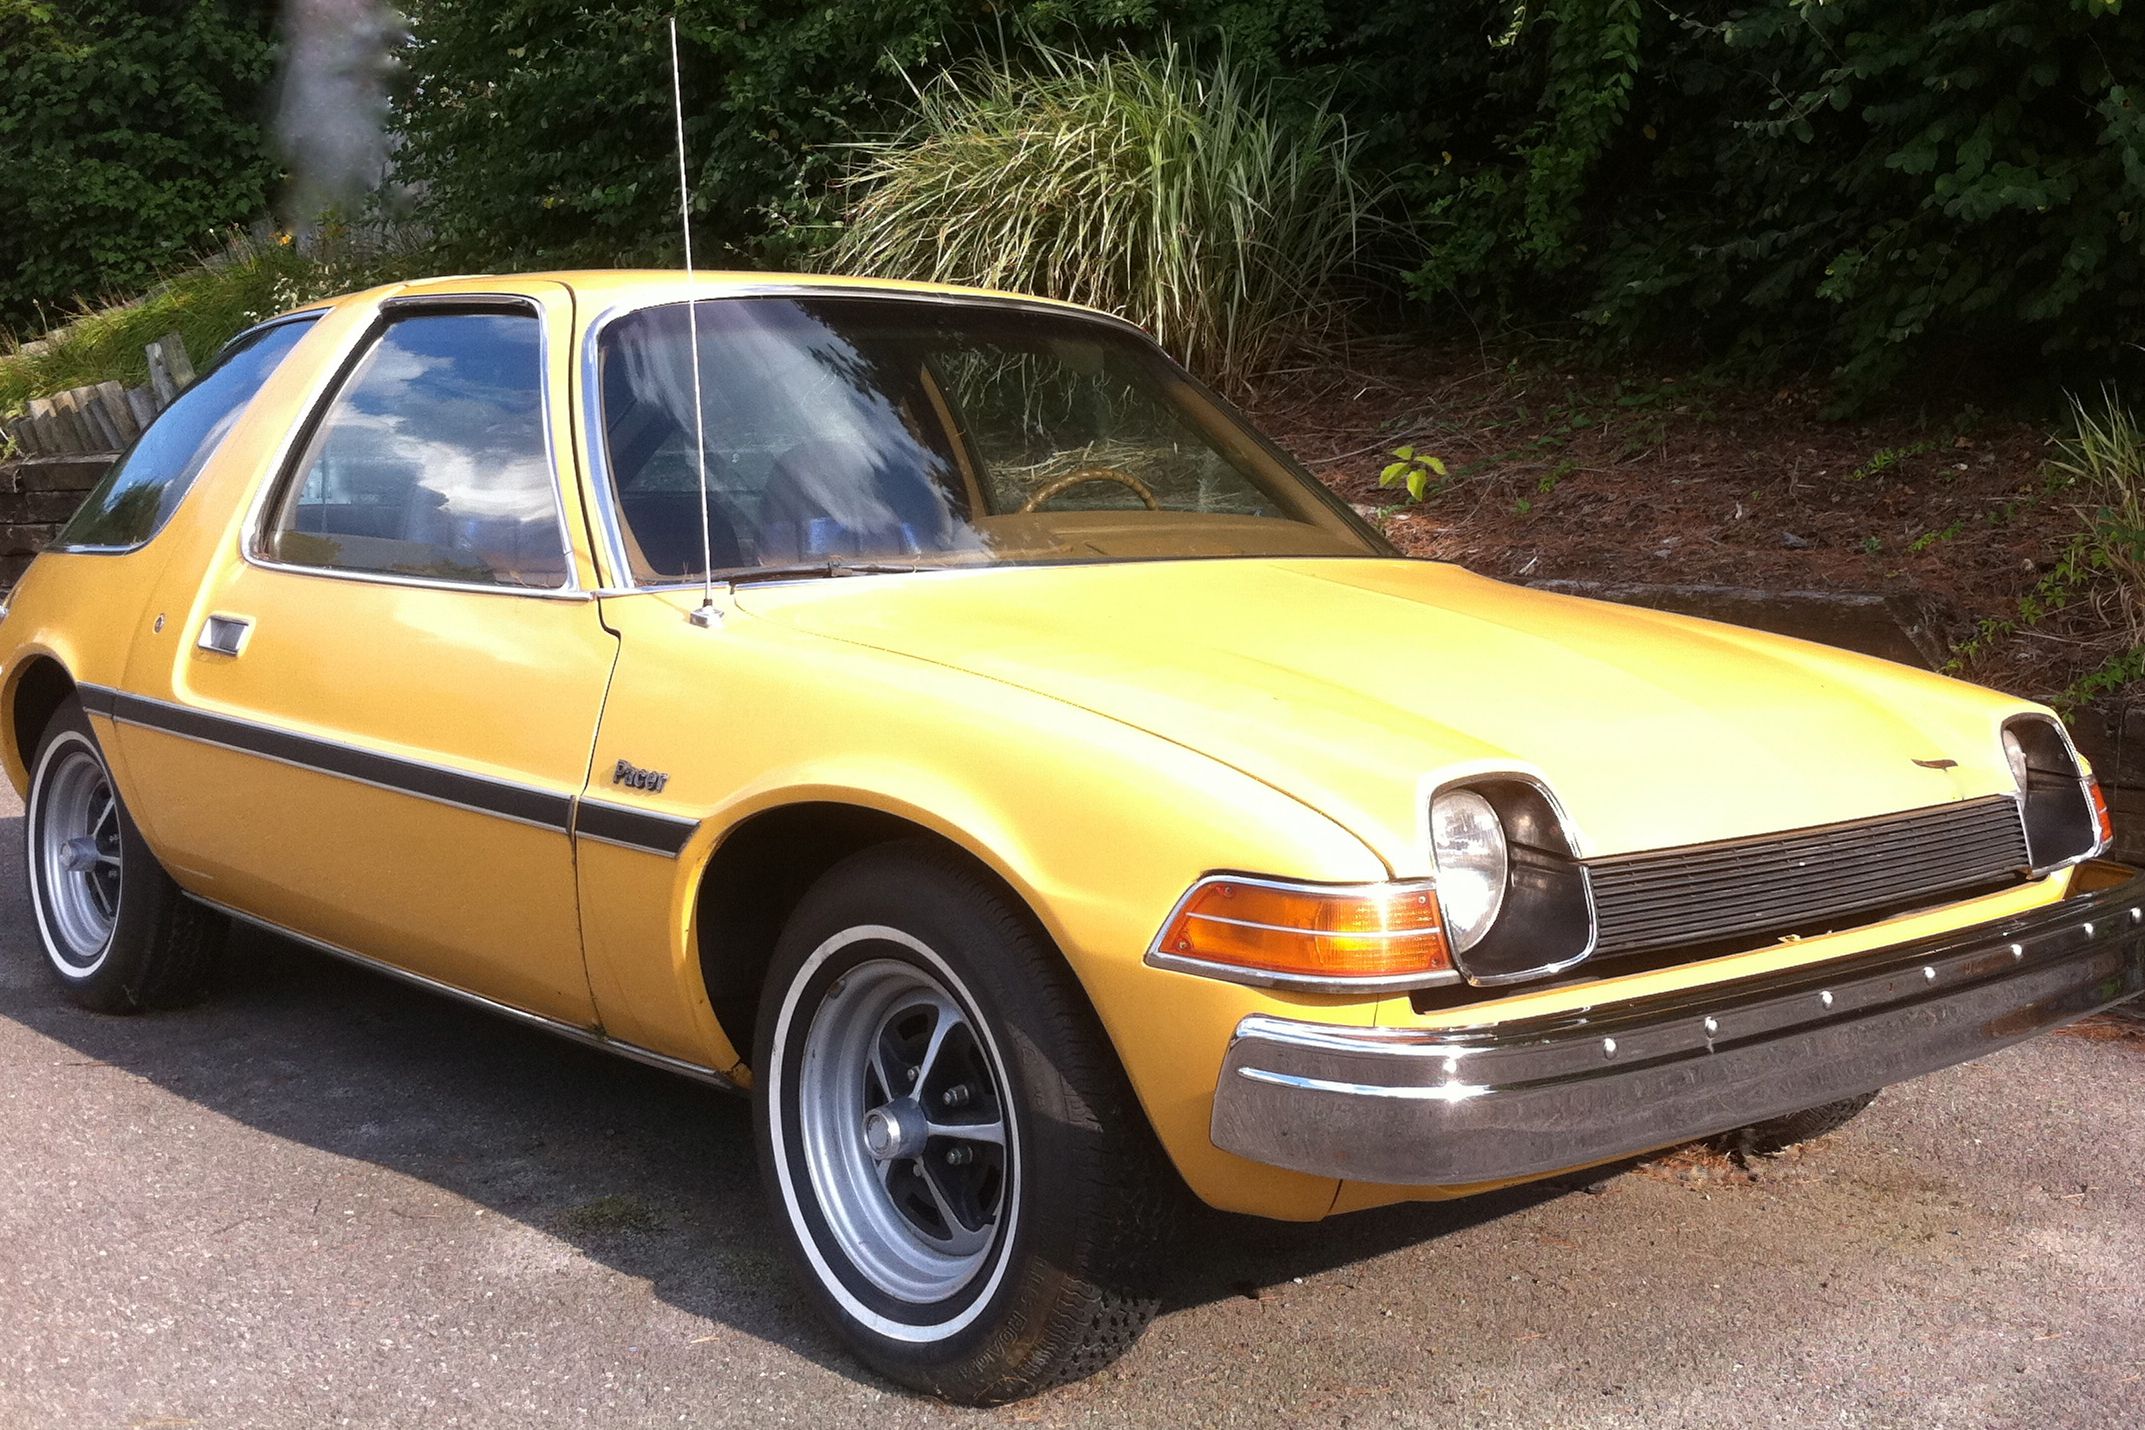 <p>Sure, a lot of ugly American cars were made in the '70s (eyes on you, Pintos and El Caminos of the world), many of them by the carmaker AMC. But even among the ugliest cars, the AMC Pacer was a special kind of ugly. It was a compact, but not really. In fact, AMC pitched it was "<a href="https://www.thetruthaboutcars.com/2010/02/curbside-classic-1975-amc-pacer-x/">the world's first wide-body compact</a>, a segment nobody had ever identified before, much less pined for," according to The Truth About Cars. "An obese compact for obese compact-haters."</p>